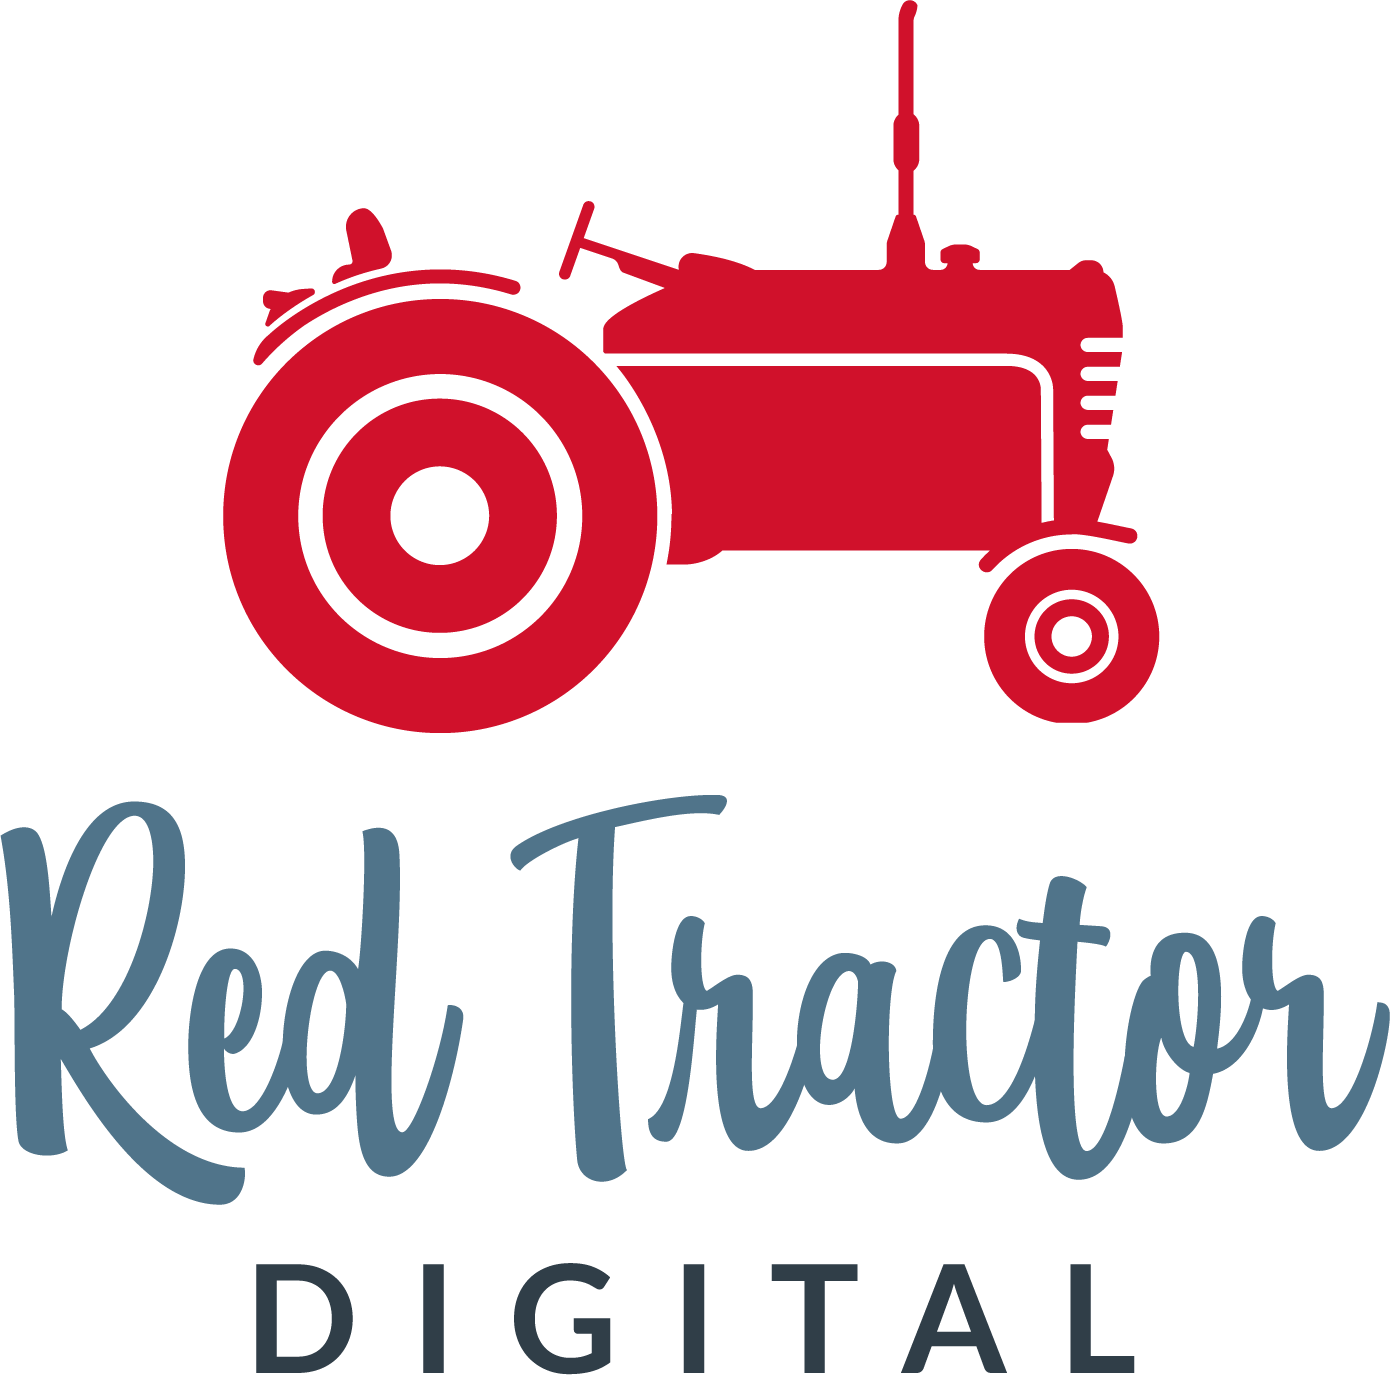 Red Tractor Digital Is A Boutique Digital Agency, Specializing - Poster (1390x1375)